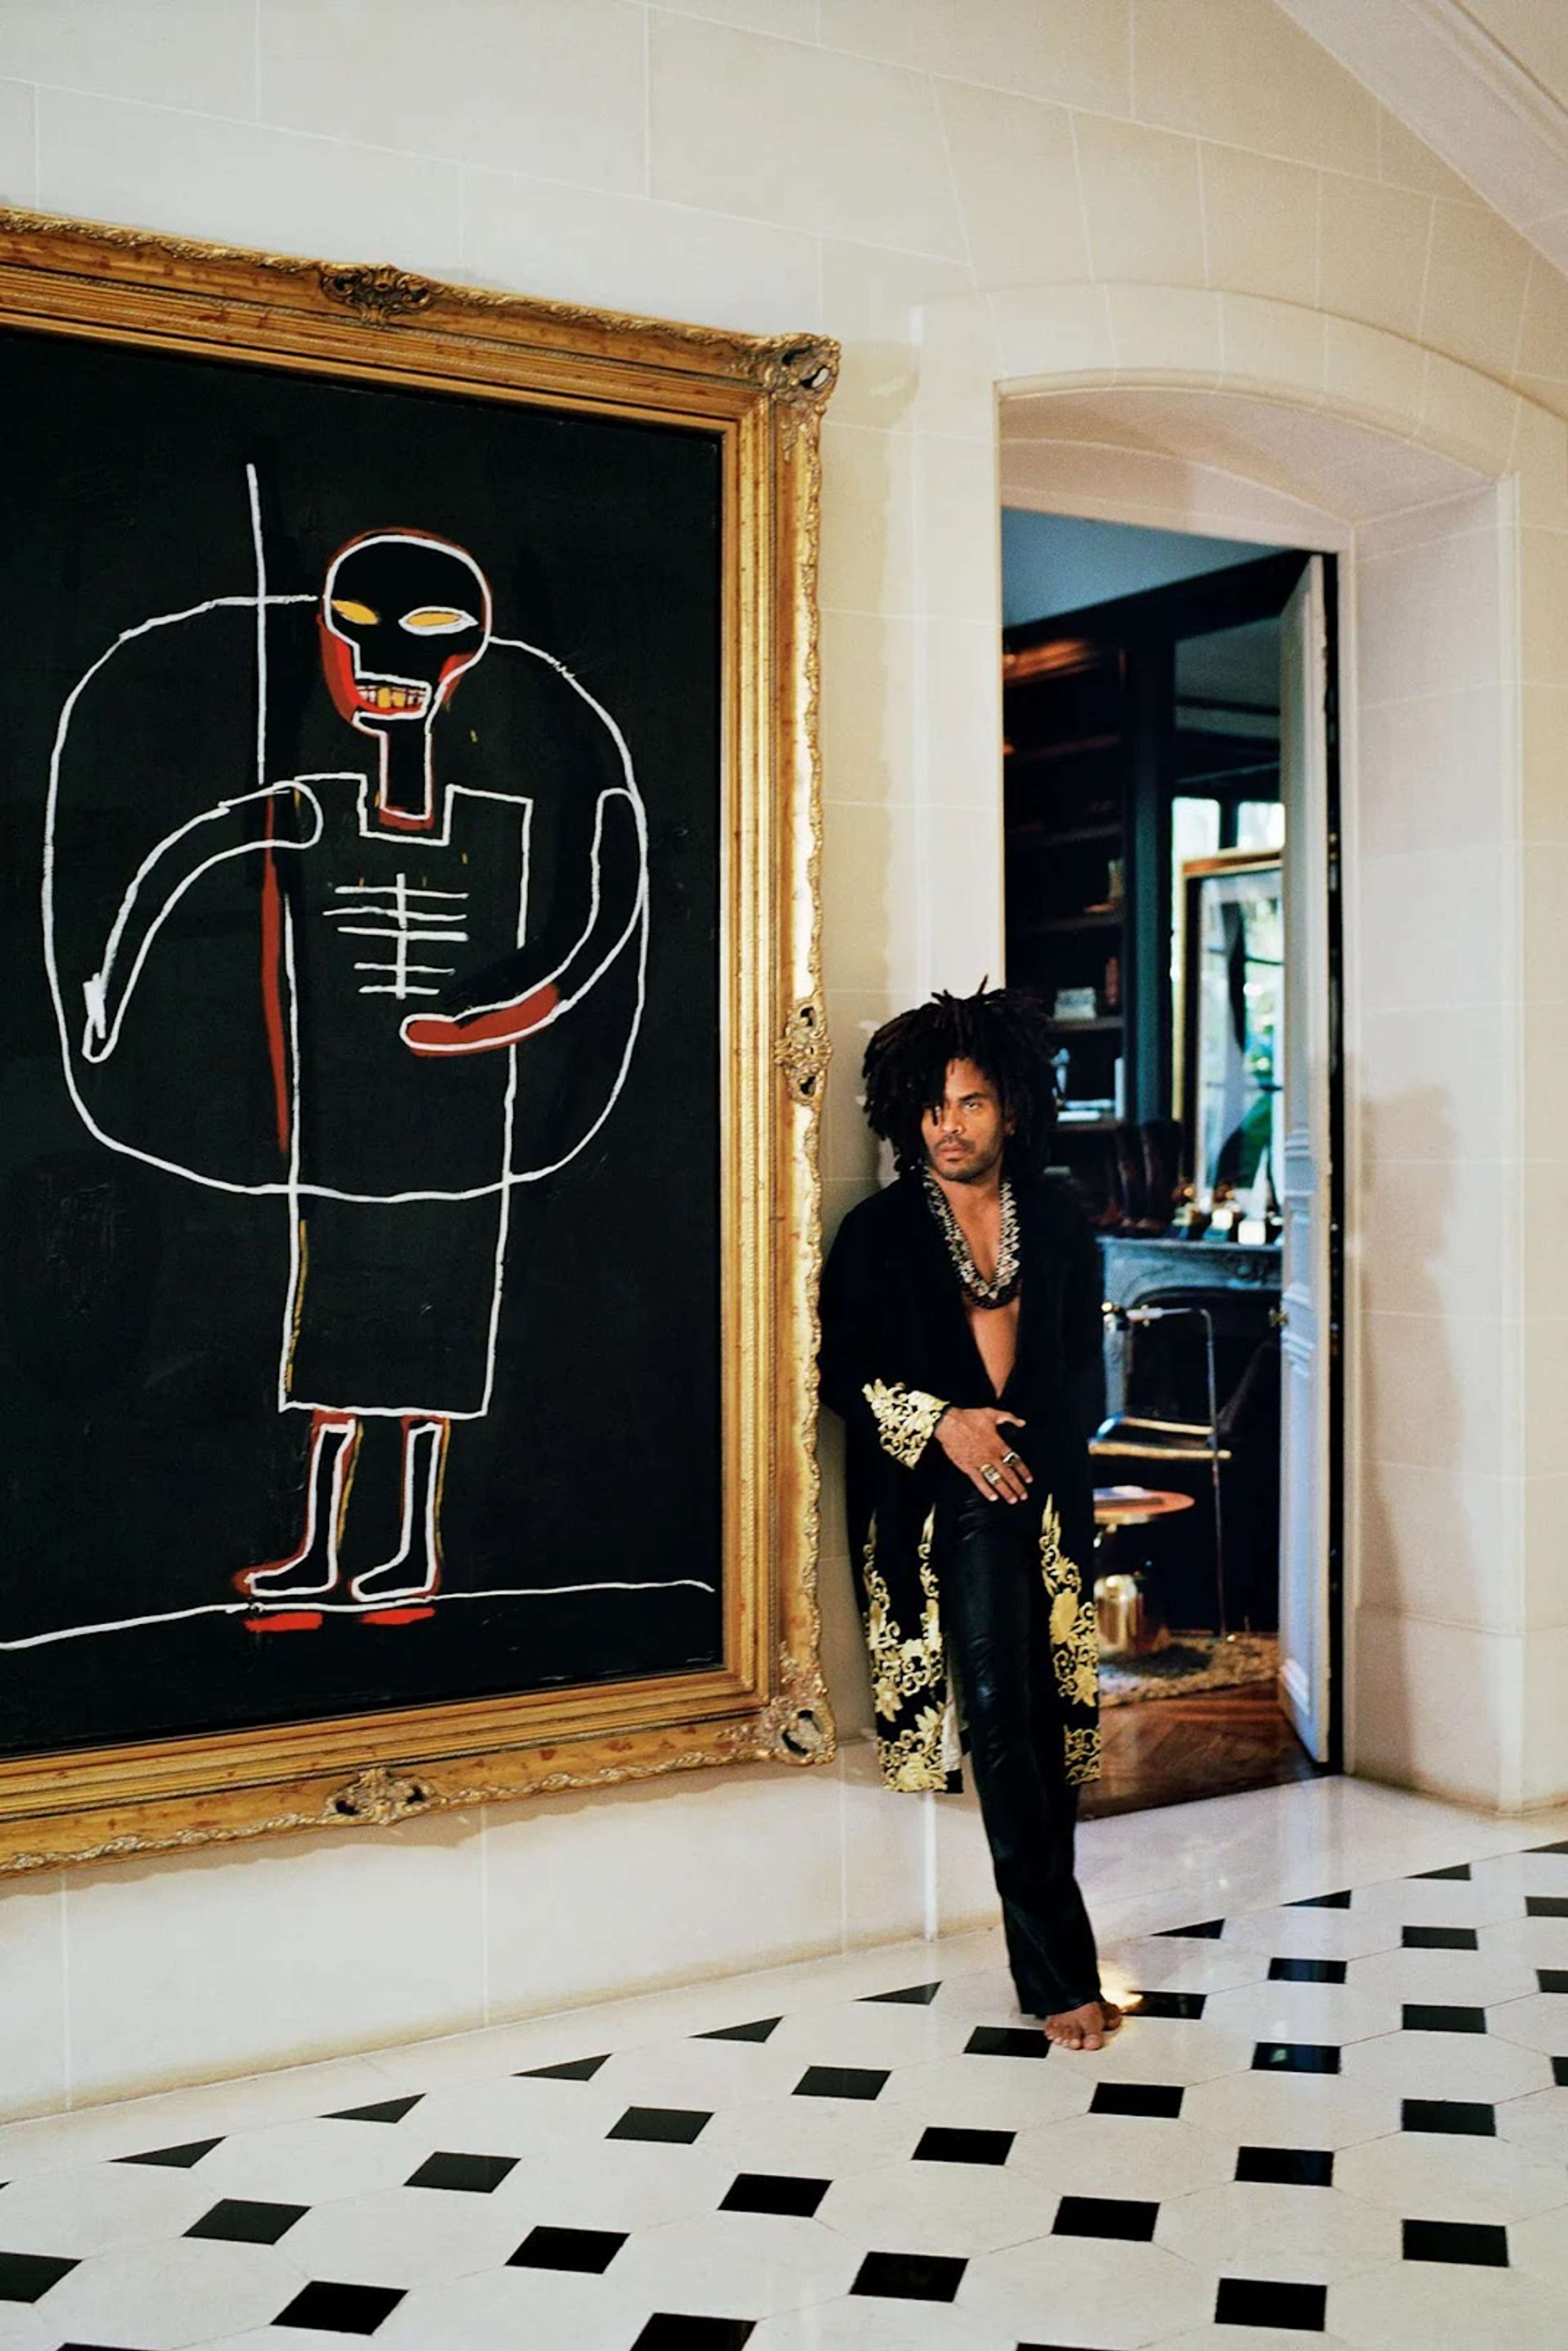 Photograph of Lenny Kravitz standing next to a Jean-Michele Basquiat painting in his home. Photograph of Lenny Kravitz standing next to a Jean-Michele Basquiat painting in his home. 